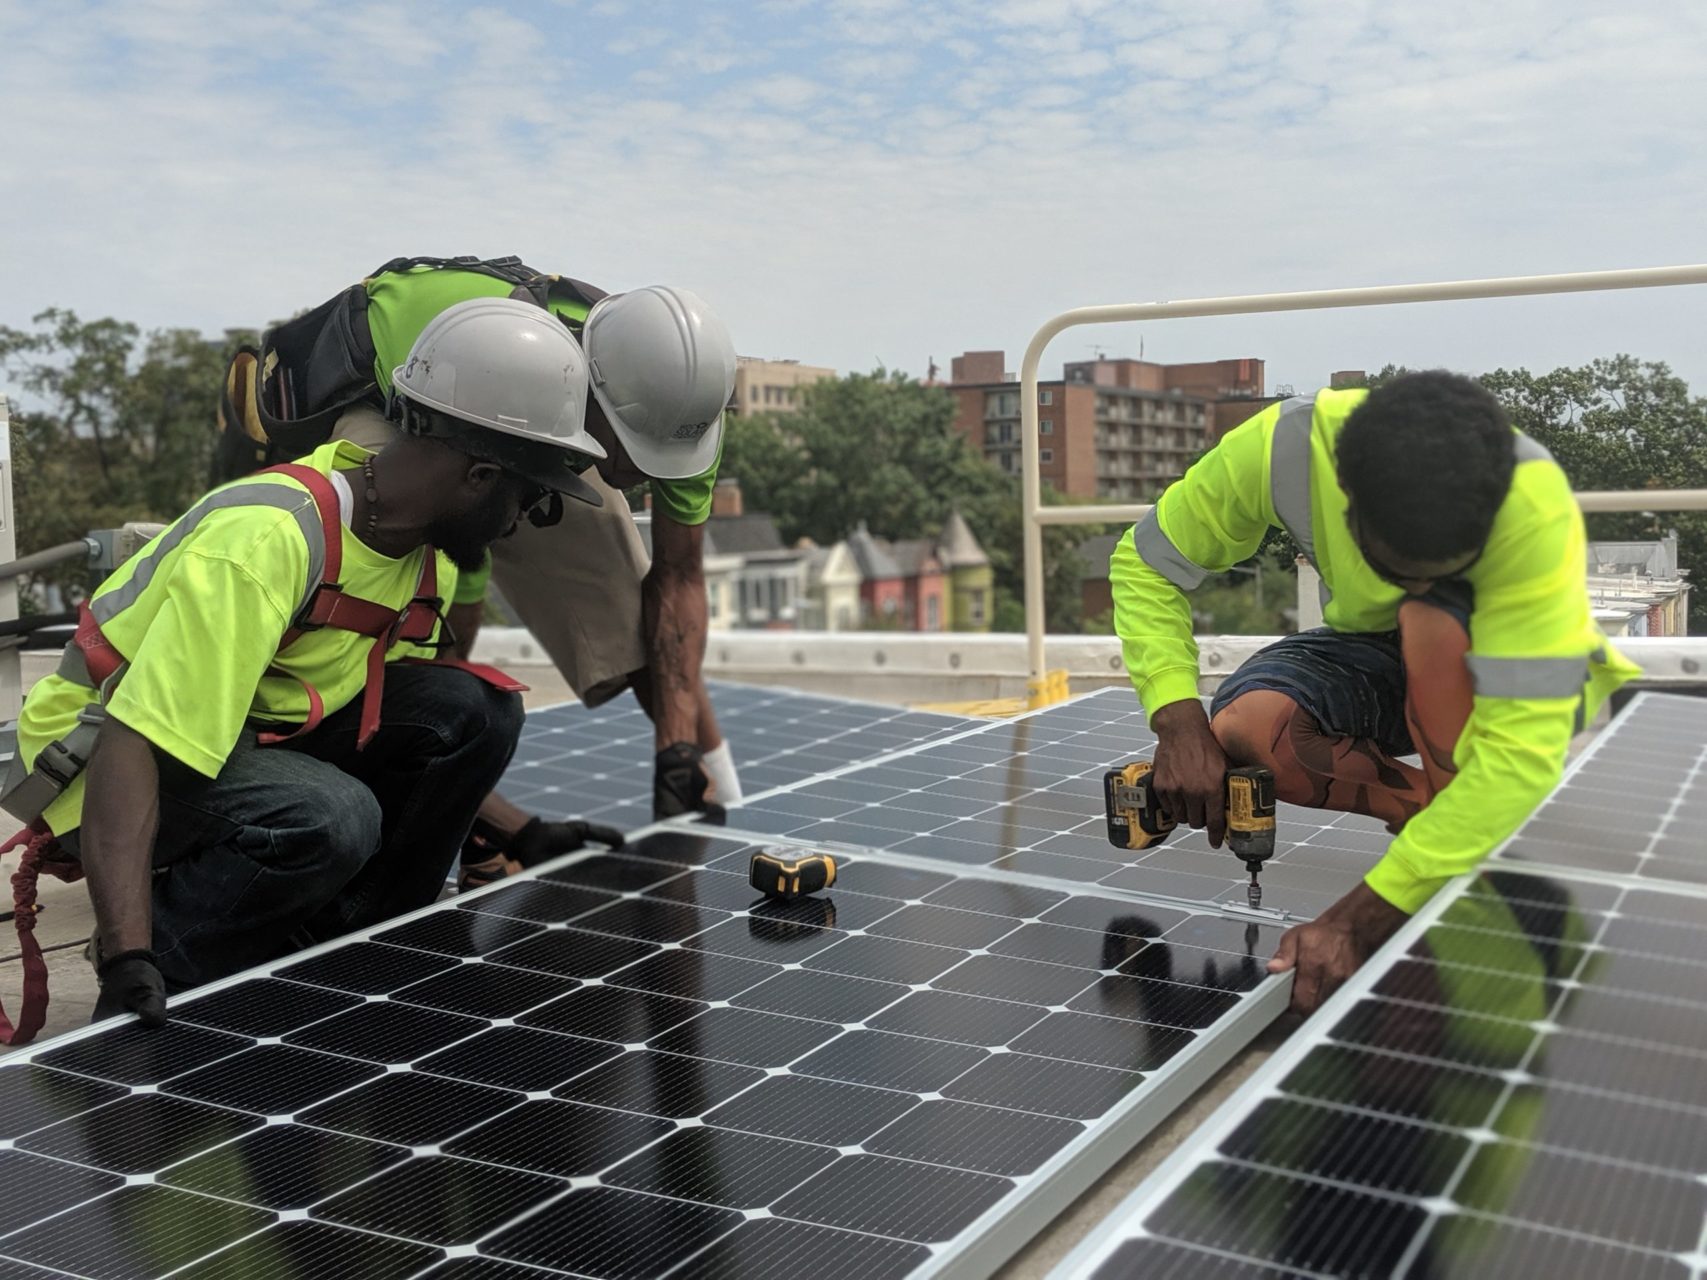 Three people standing on a rooftop around solar panels. Two are wearing construction hats to the left and the person on the right is holding a drill. They are all wearing neon safety shirts. The backdrop has trees, houses, buildings, and the sky is partially cloudy but parts of it are bright.